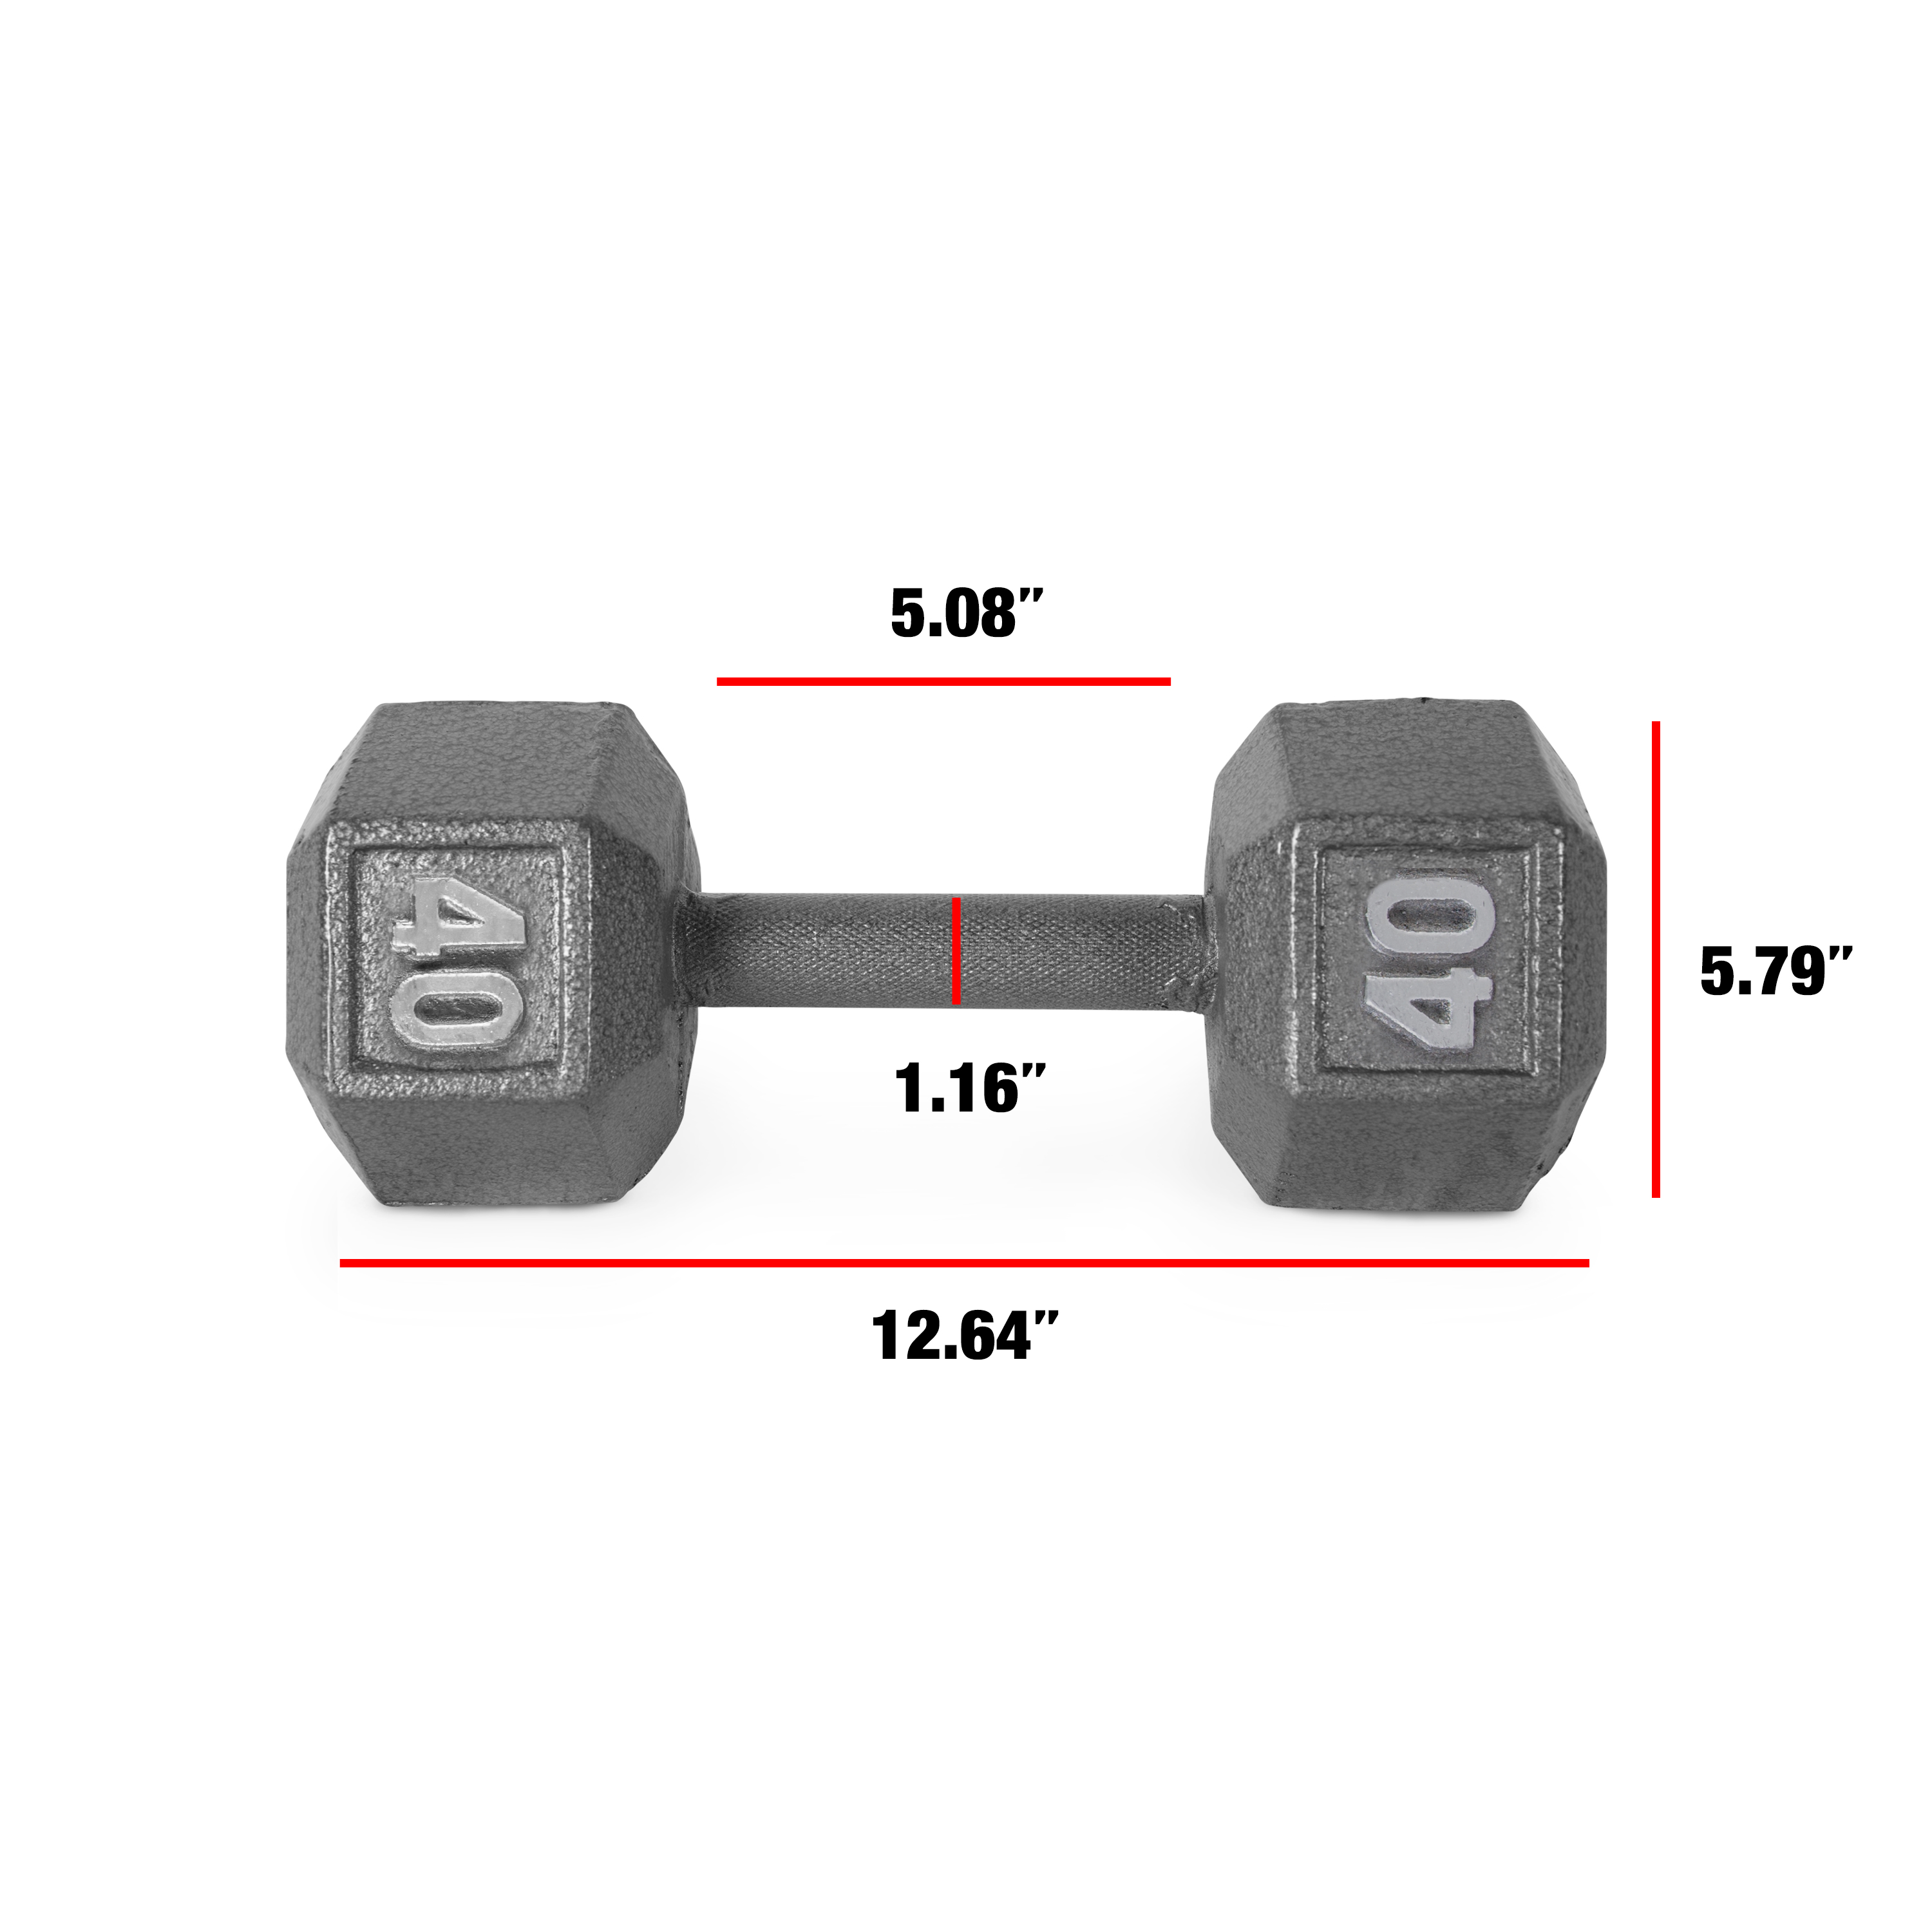 CAP Barbell 40lb Cast Iron Hex Dumbbell, Single - image 3 of 6